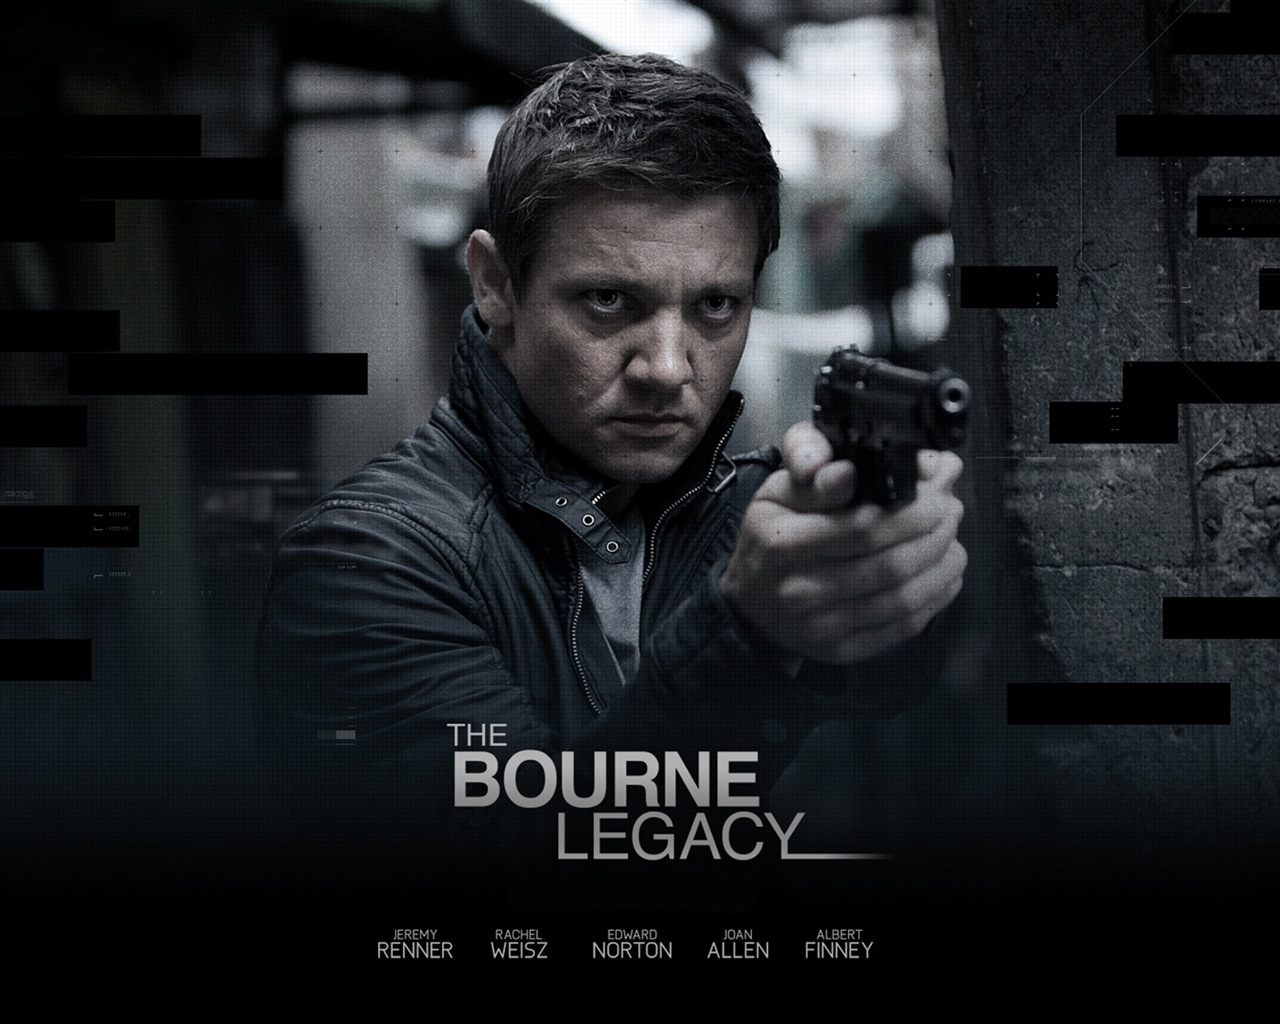 The Bourne Legacy HD wallpapers #2 - 1280x1024